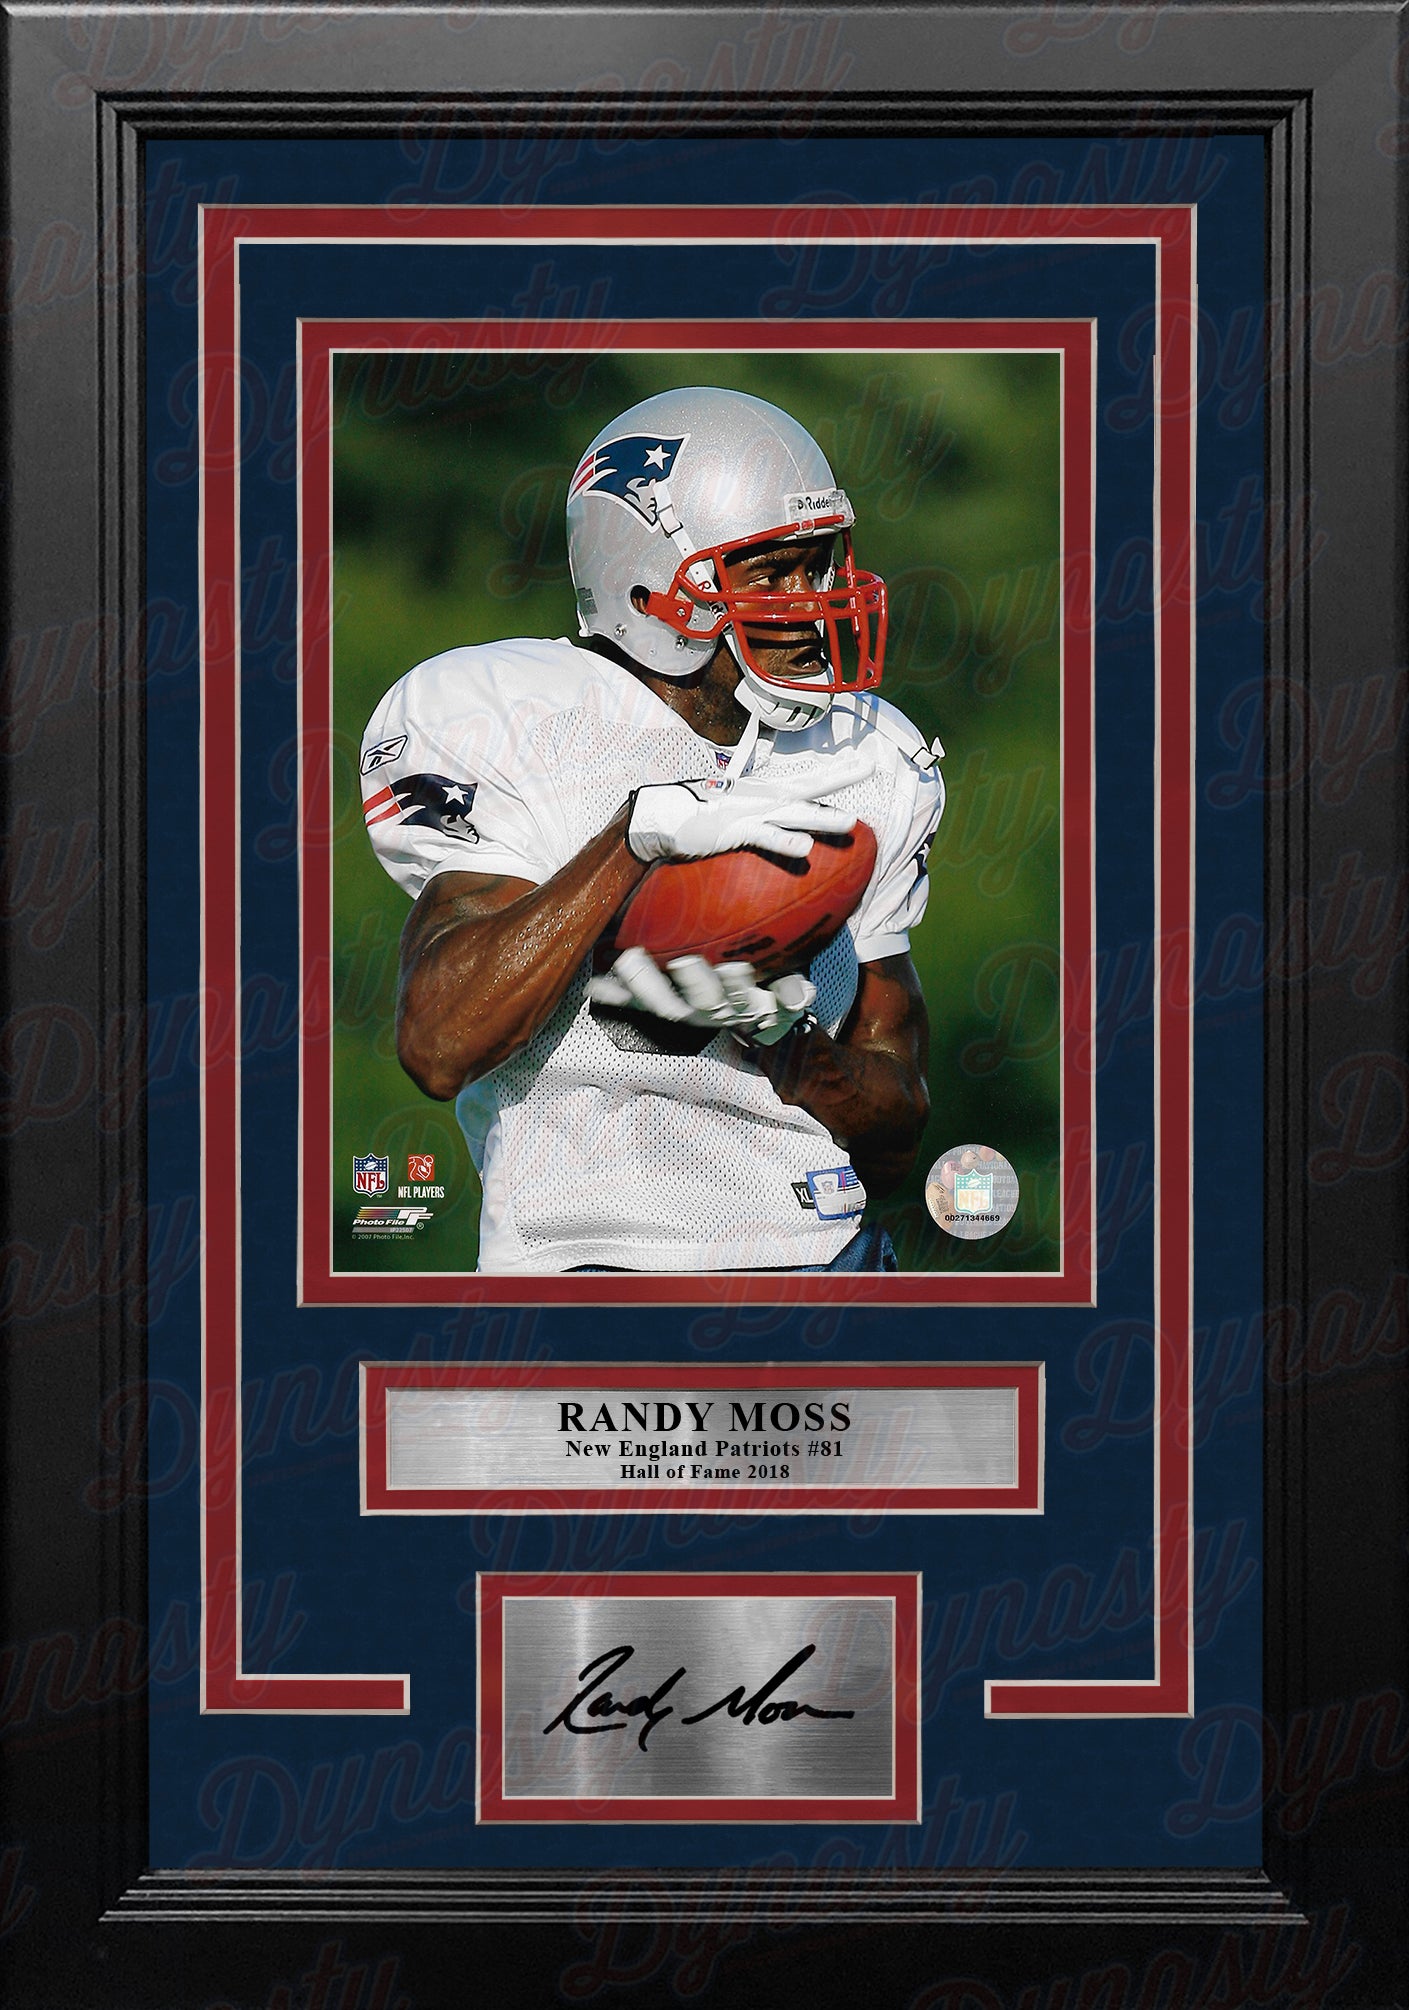 Randy Moss in Action New England Patriots 8" x 10" Framed Football Photo with Engraved Autograph - Dynasty Sports & Framing 